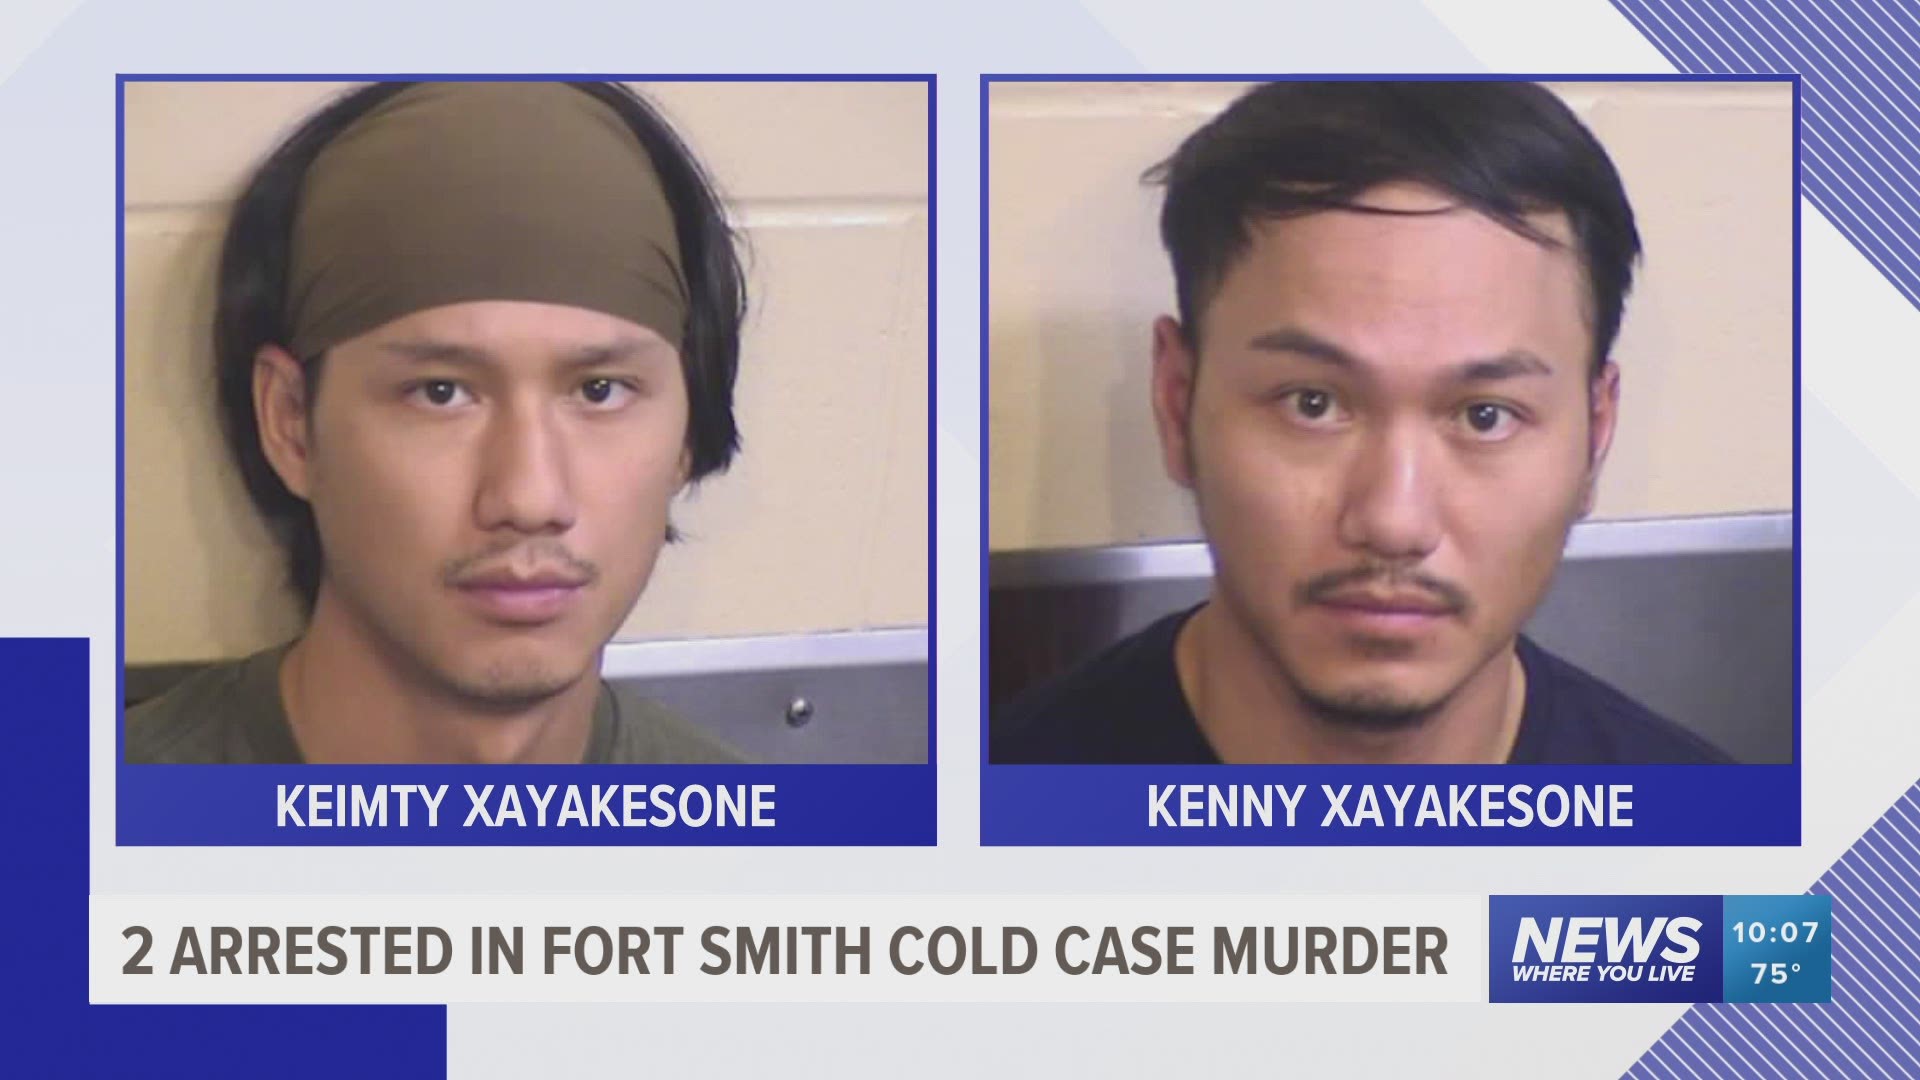 Two men have been arrested in Fresno, California in connection to a Fort Smith murder case dating back to 2004. https://bit.ly/2ZmiksT